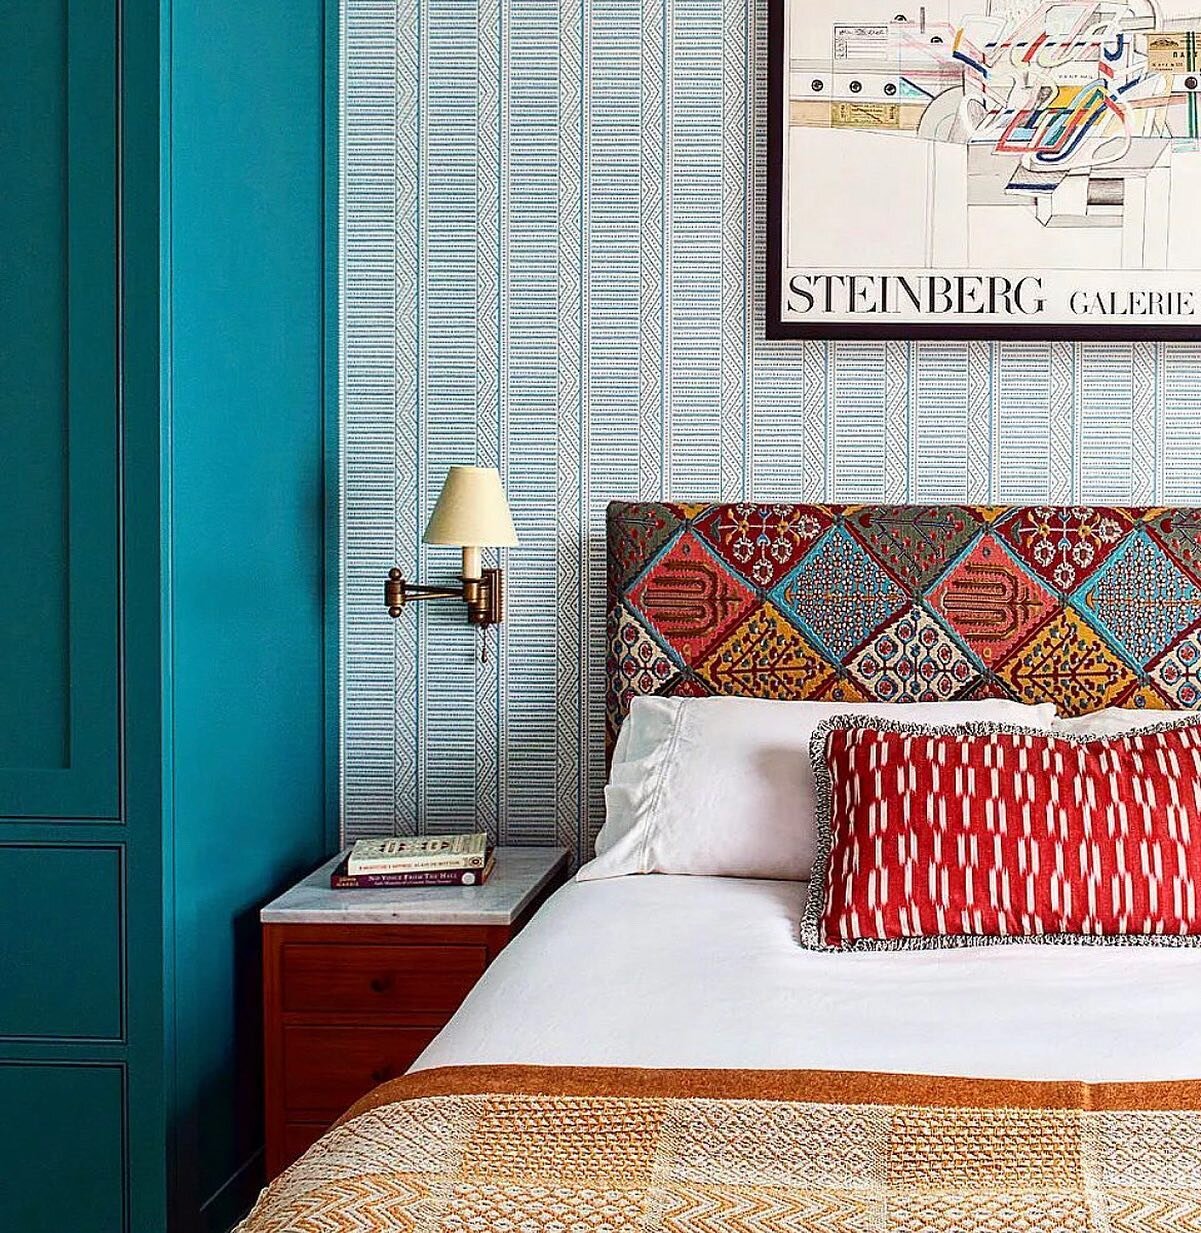 We&rsquo;re dazzled by all of the patterns used in this design &mdash; from the headboard to the wallpaper, pillow to the throw &mdash; that contrast with each other, yet remain harmonious through the clever use of coordinating hues! 

🎨 Design by: 